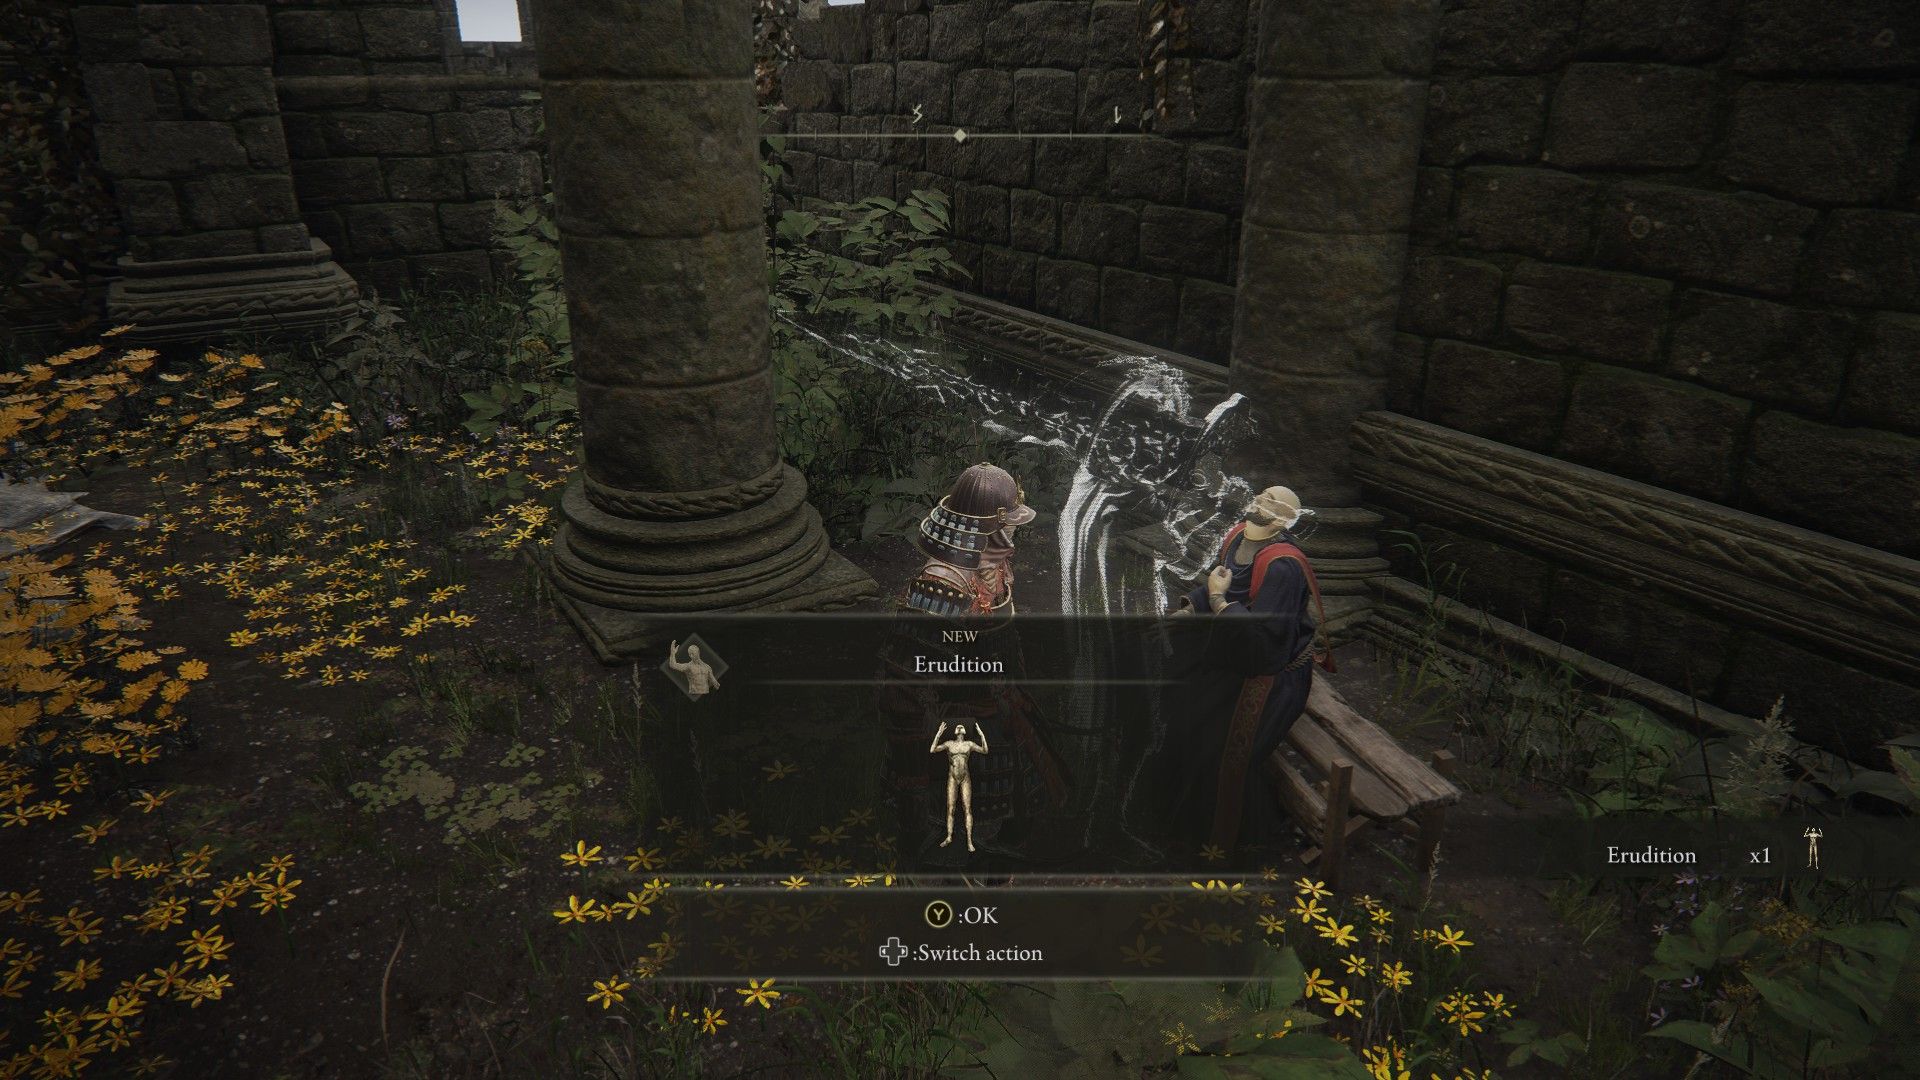 Thops Gives Erudition To Samurai After Giving Glintstone Key in Elden Ring